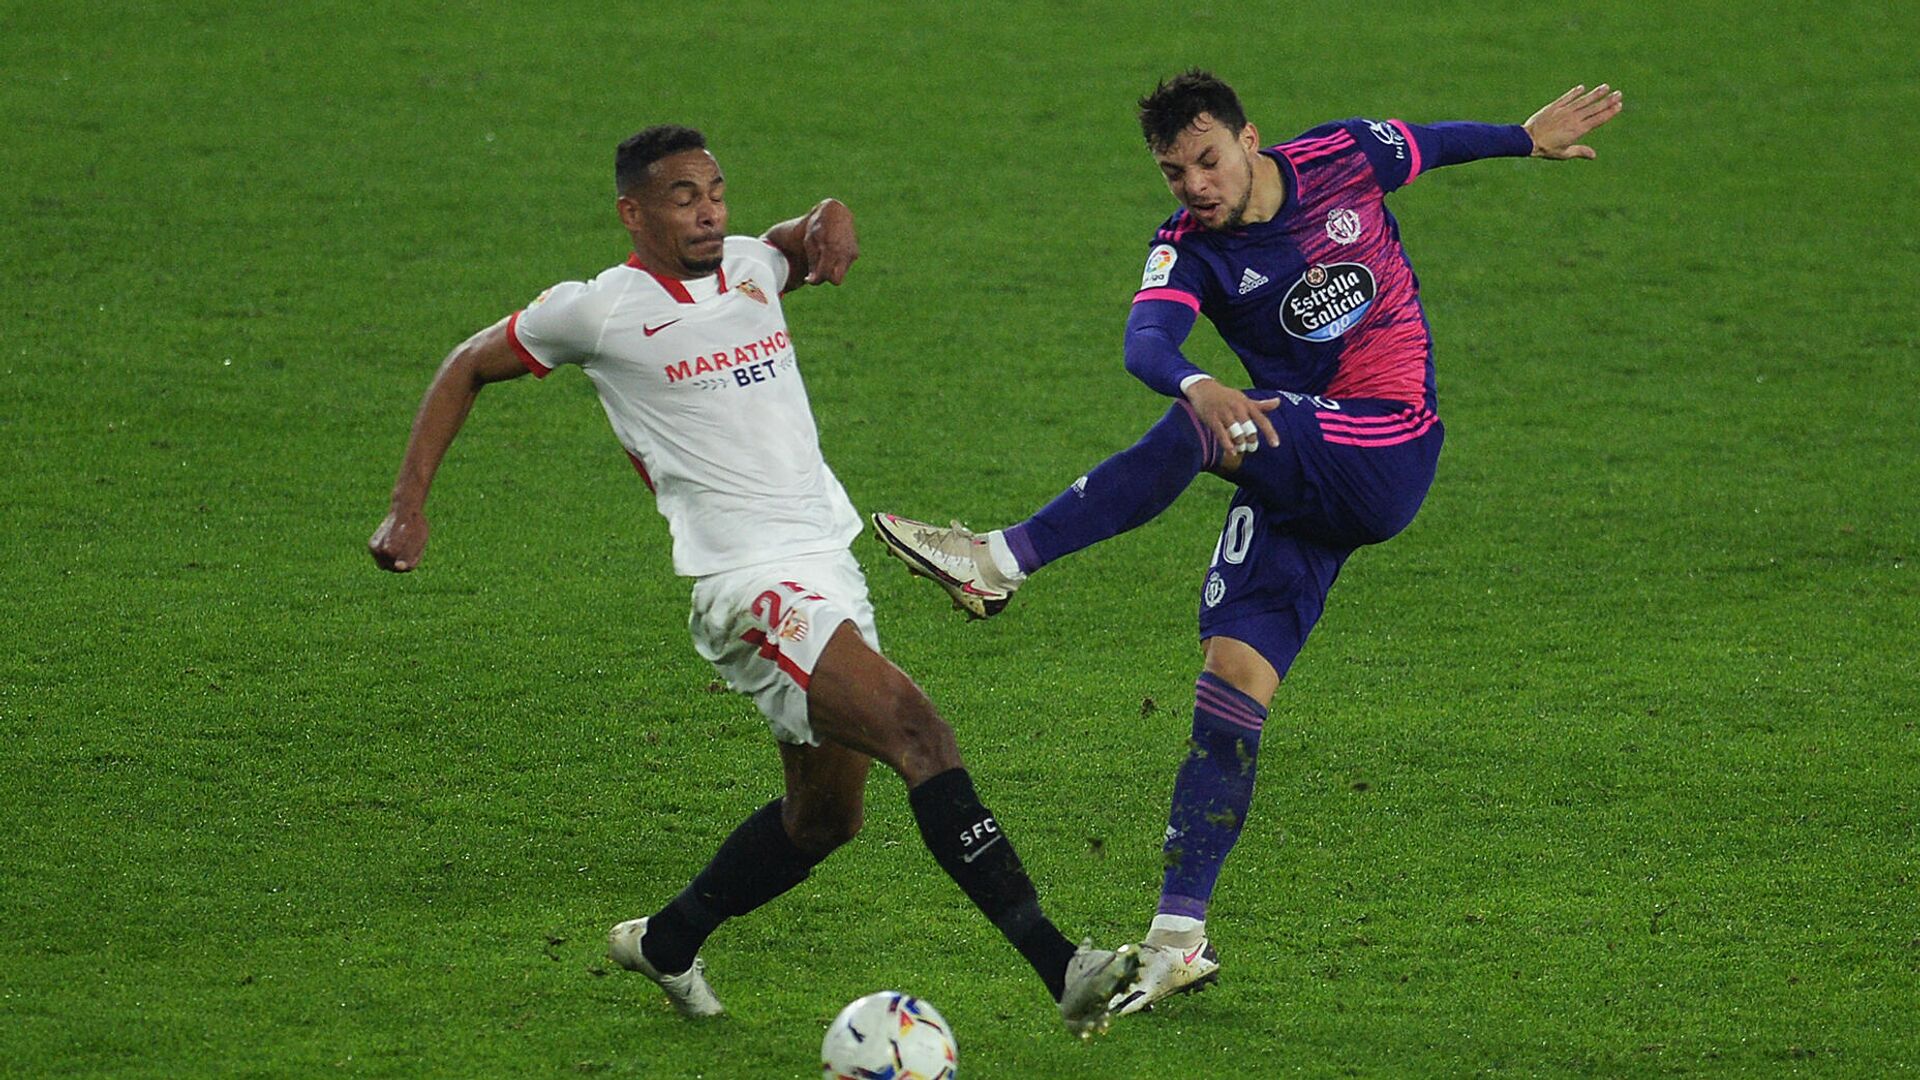 Valladolid's Spanish midfielder Oscar Plano (R) vies with Sevilla's Brazilian midfielder Fernando  during the Spanish league football match between Sevilla FC and Real Valladolid FC at the Ramon Sanchez Pizjuan stadium in Seville on December 19, 2020. (Photo by CRISTINA QUICLER / AFP) - РИА Новости, 1920, 20.12.2020